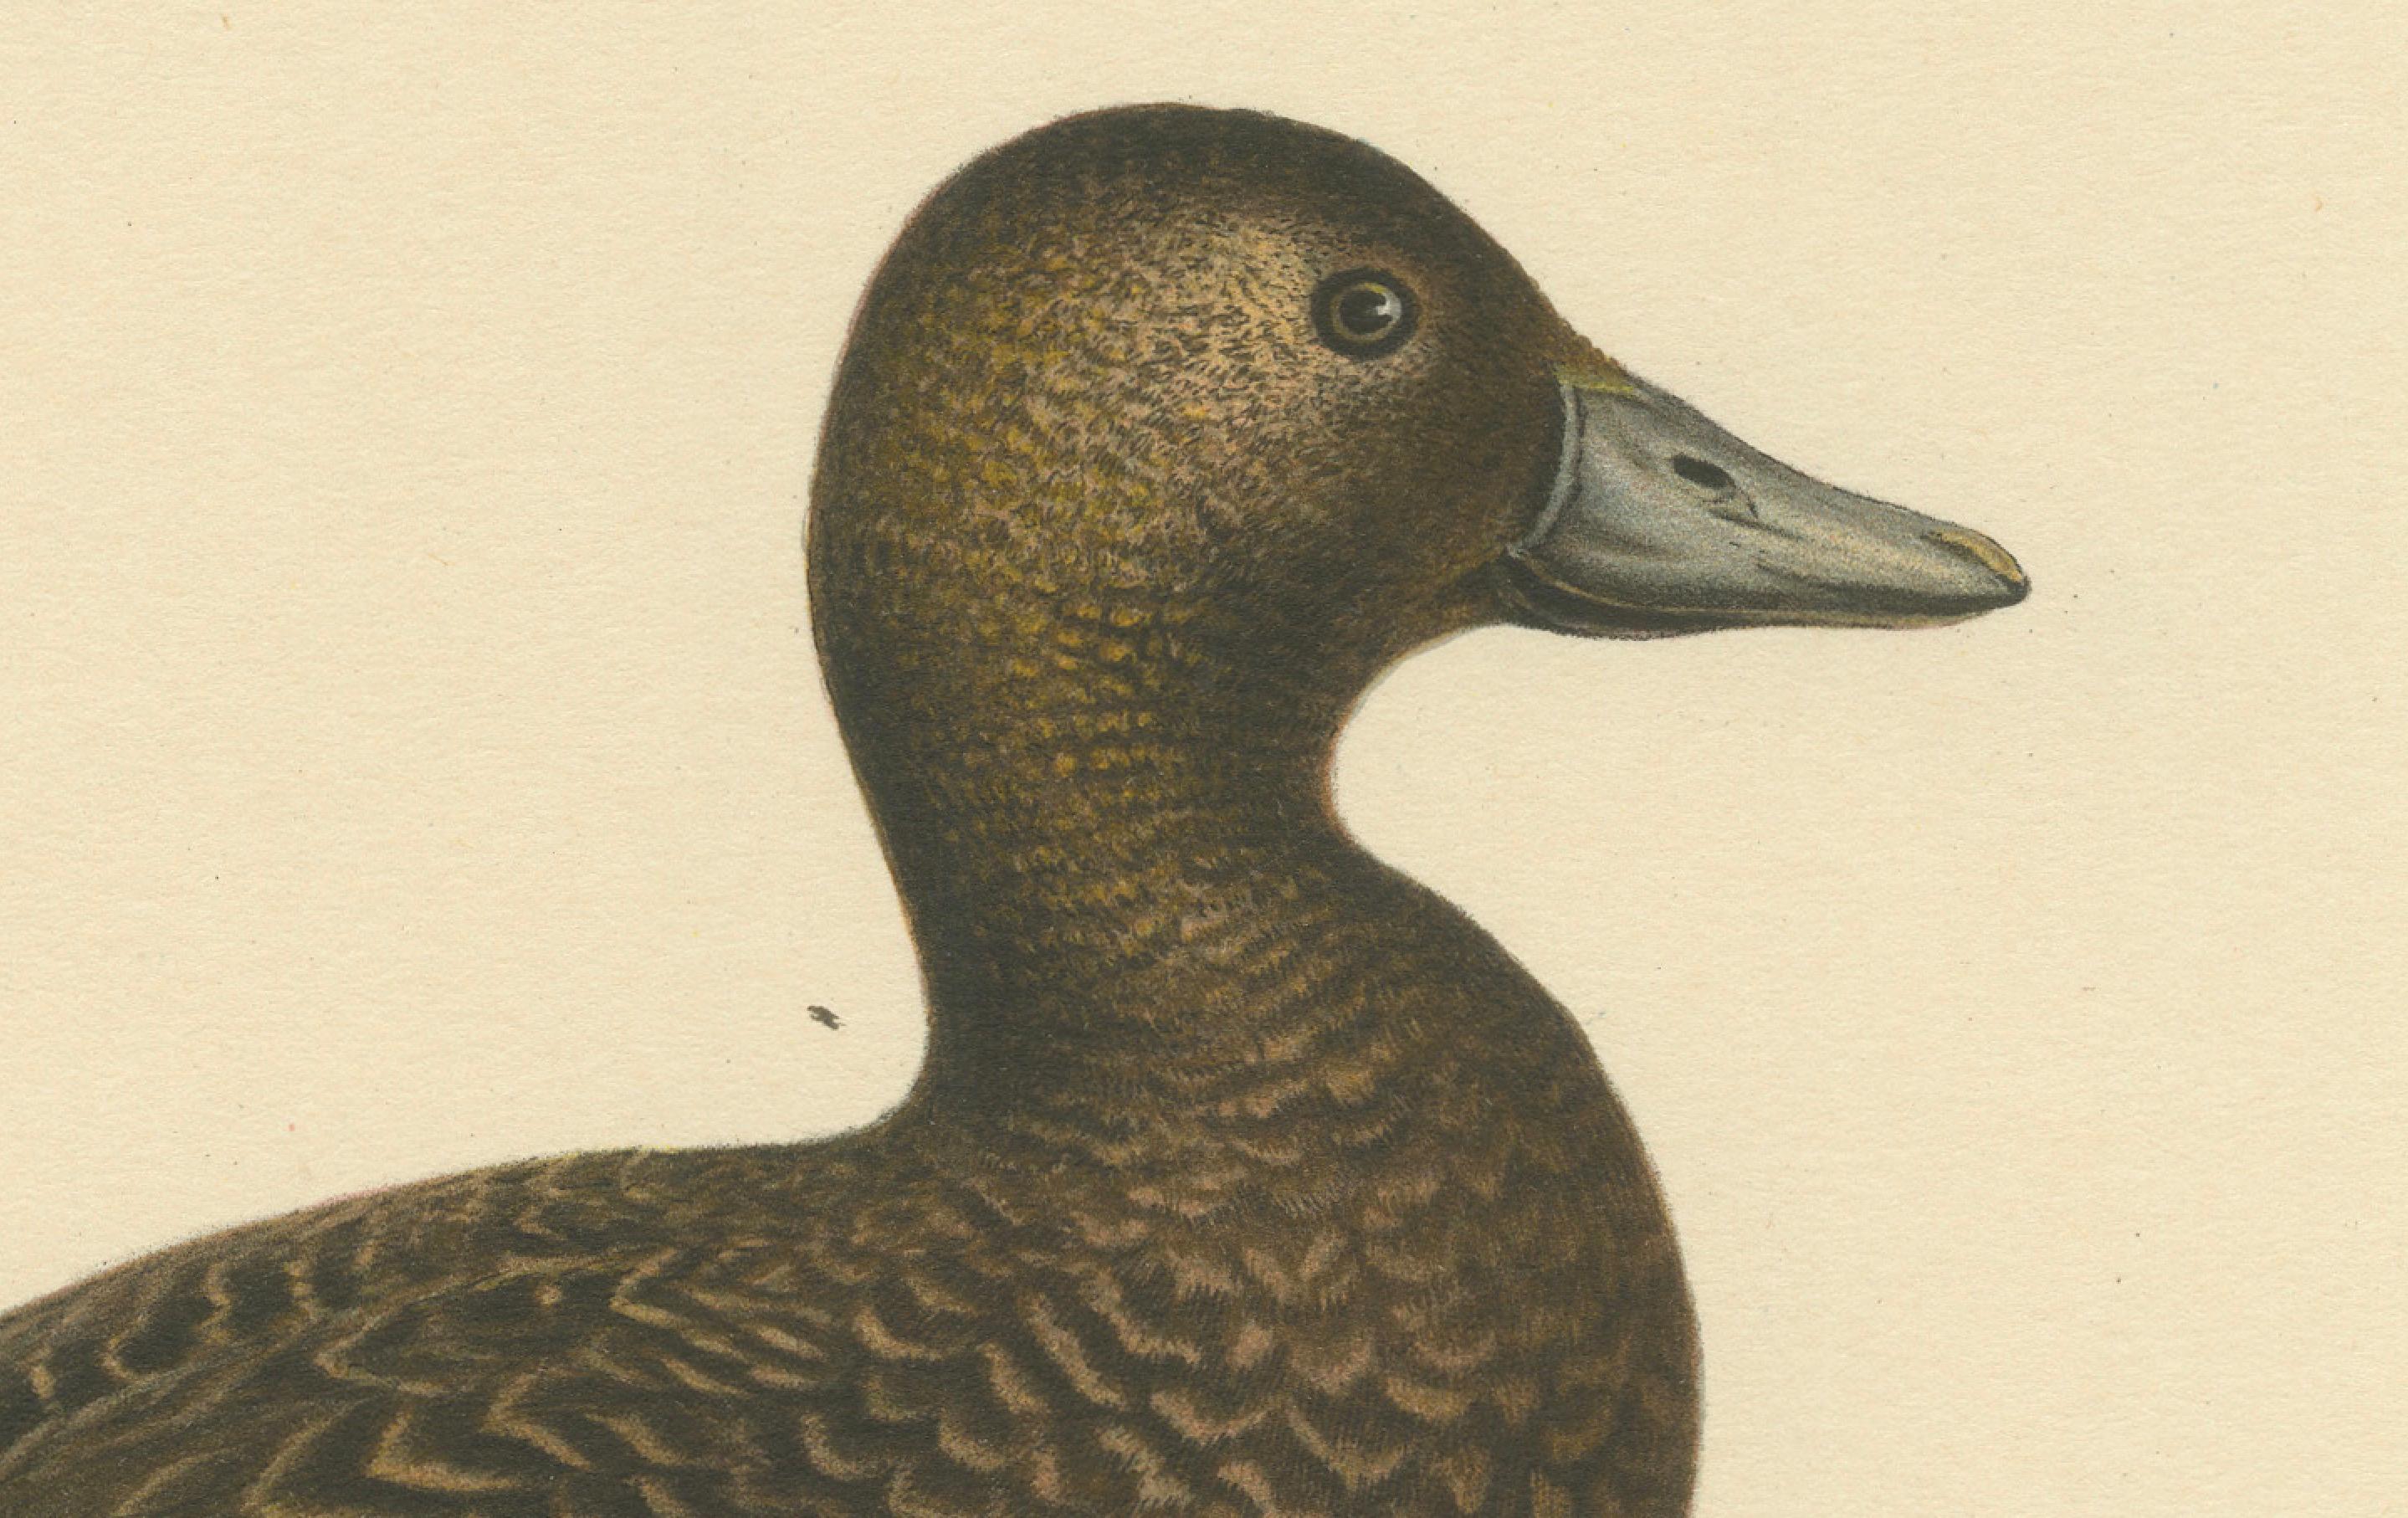 This print offers a detailed and lifelike portrayal of a female Steller's eider, scientifically known as Eniconetta stelleri. The bird is presented in a side view, allowing the viewer to observe its distinctive plumage patterns and colors. The